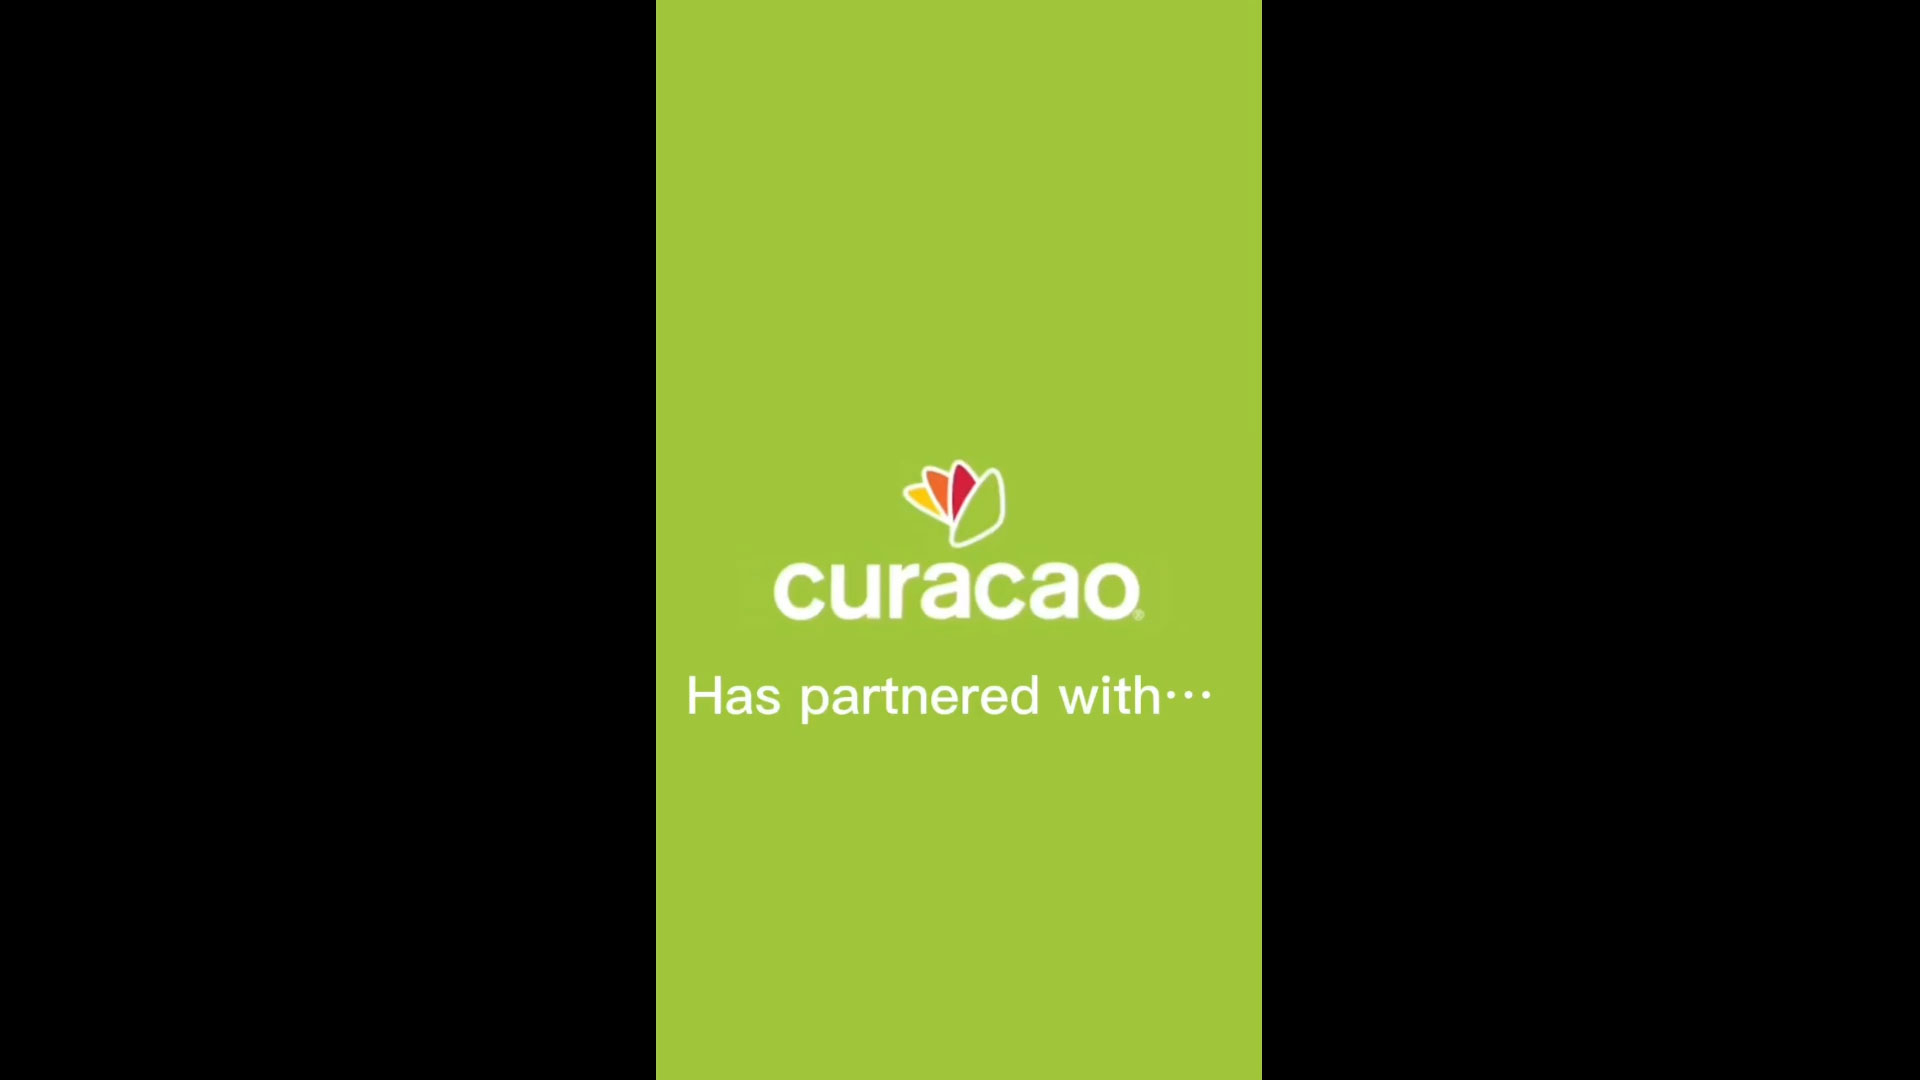 Curacao announced it engaged thousands of families in a variety of community initiatives in 2022, including a partnership with the Boys & Girls Clubs of Long Beach and the David Z Foundation to provide a one-of-a-kind music program.